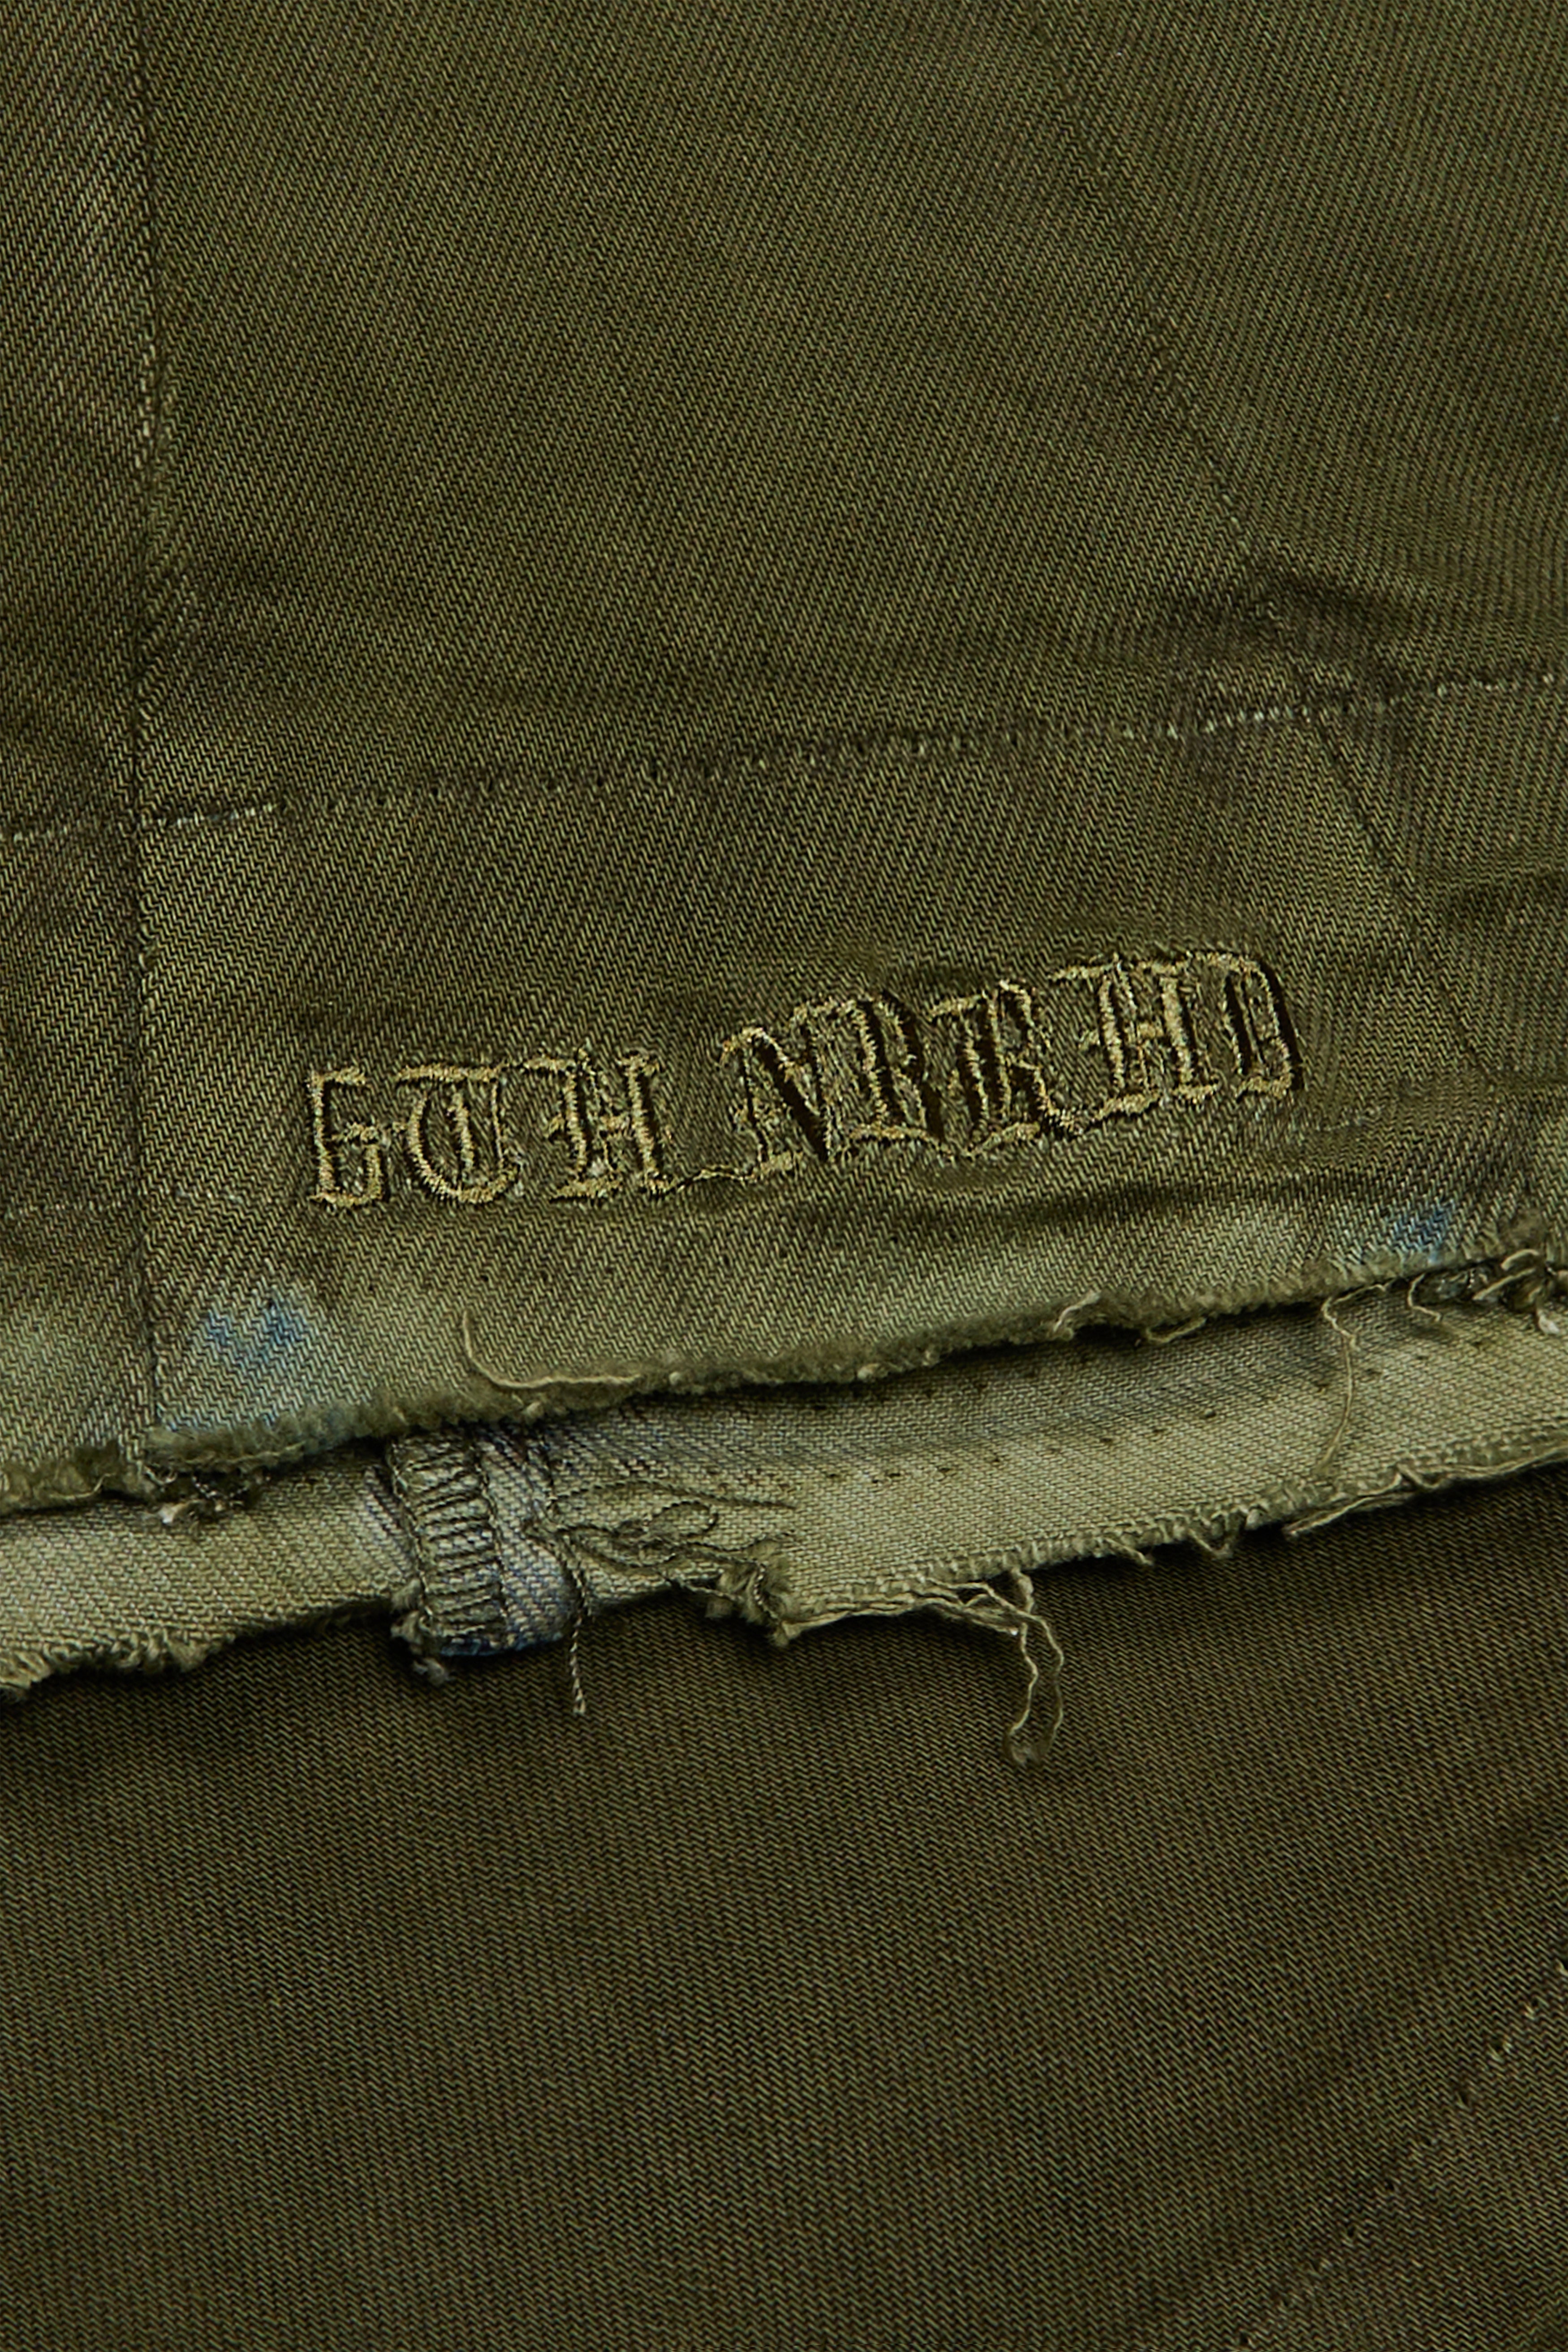 6thNBRHD STACKED "INDIANA" -OLIVE